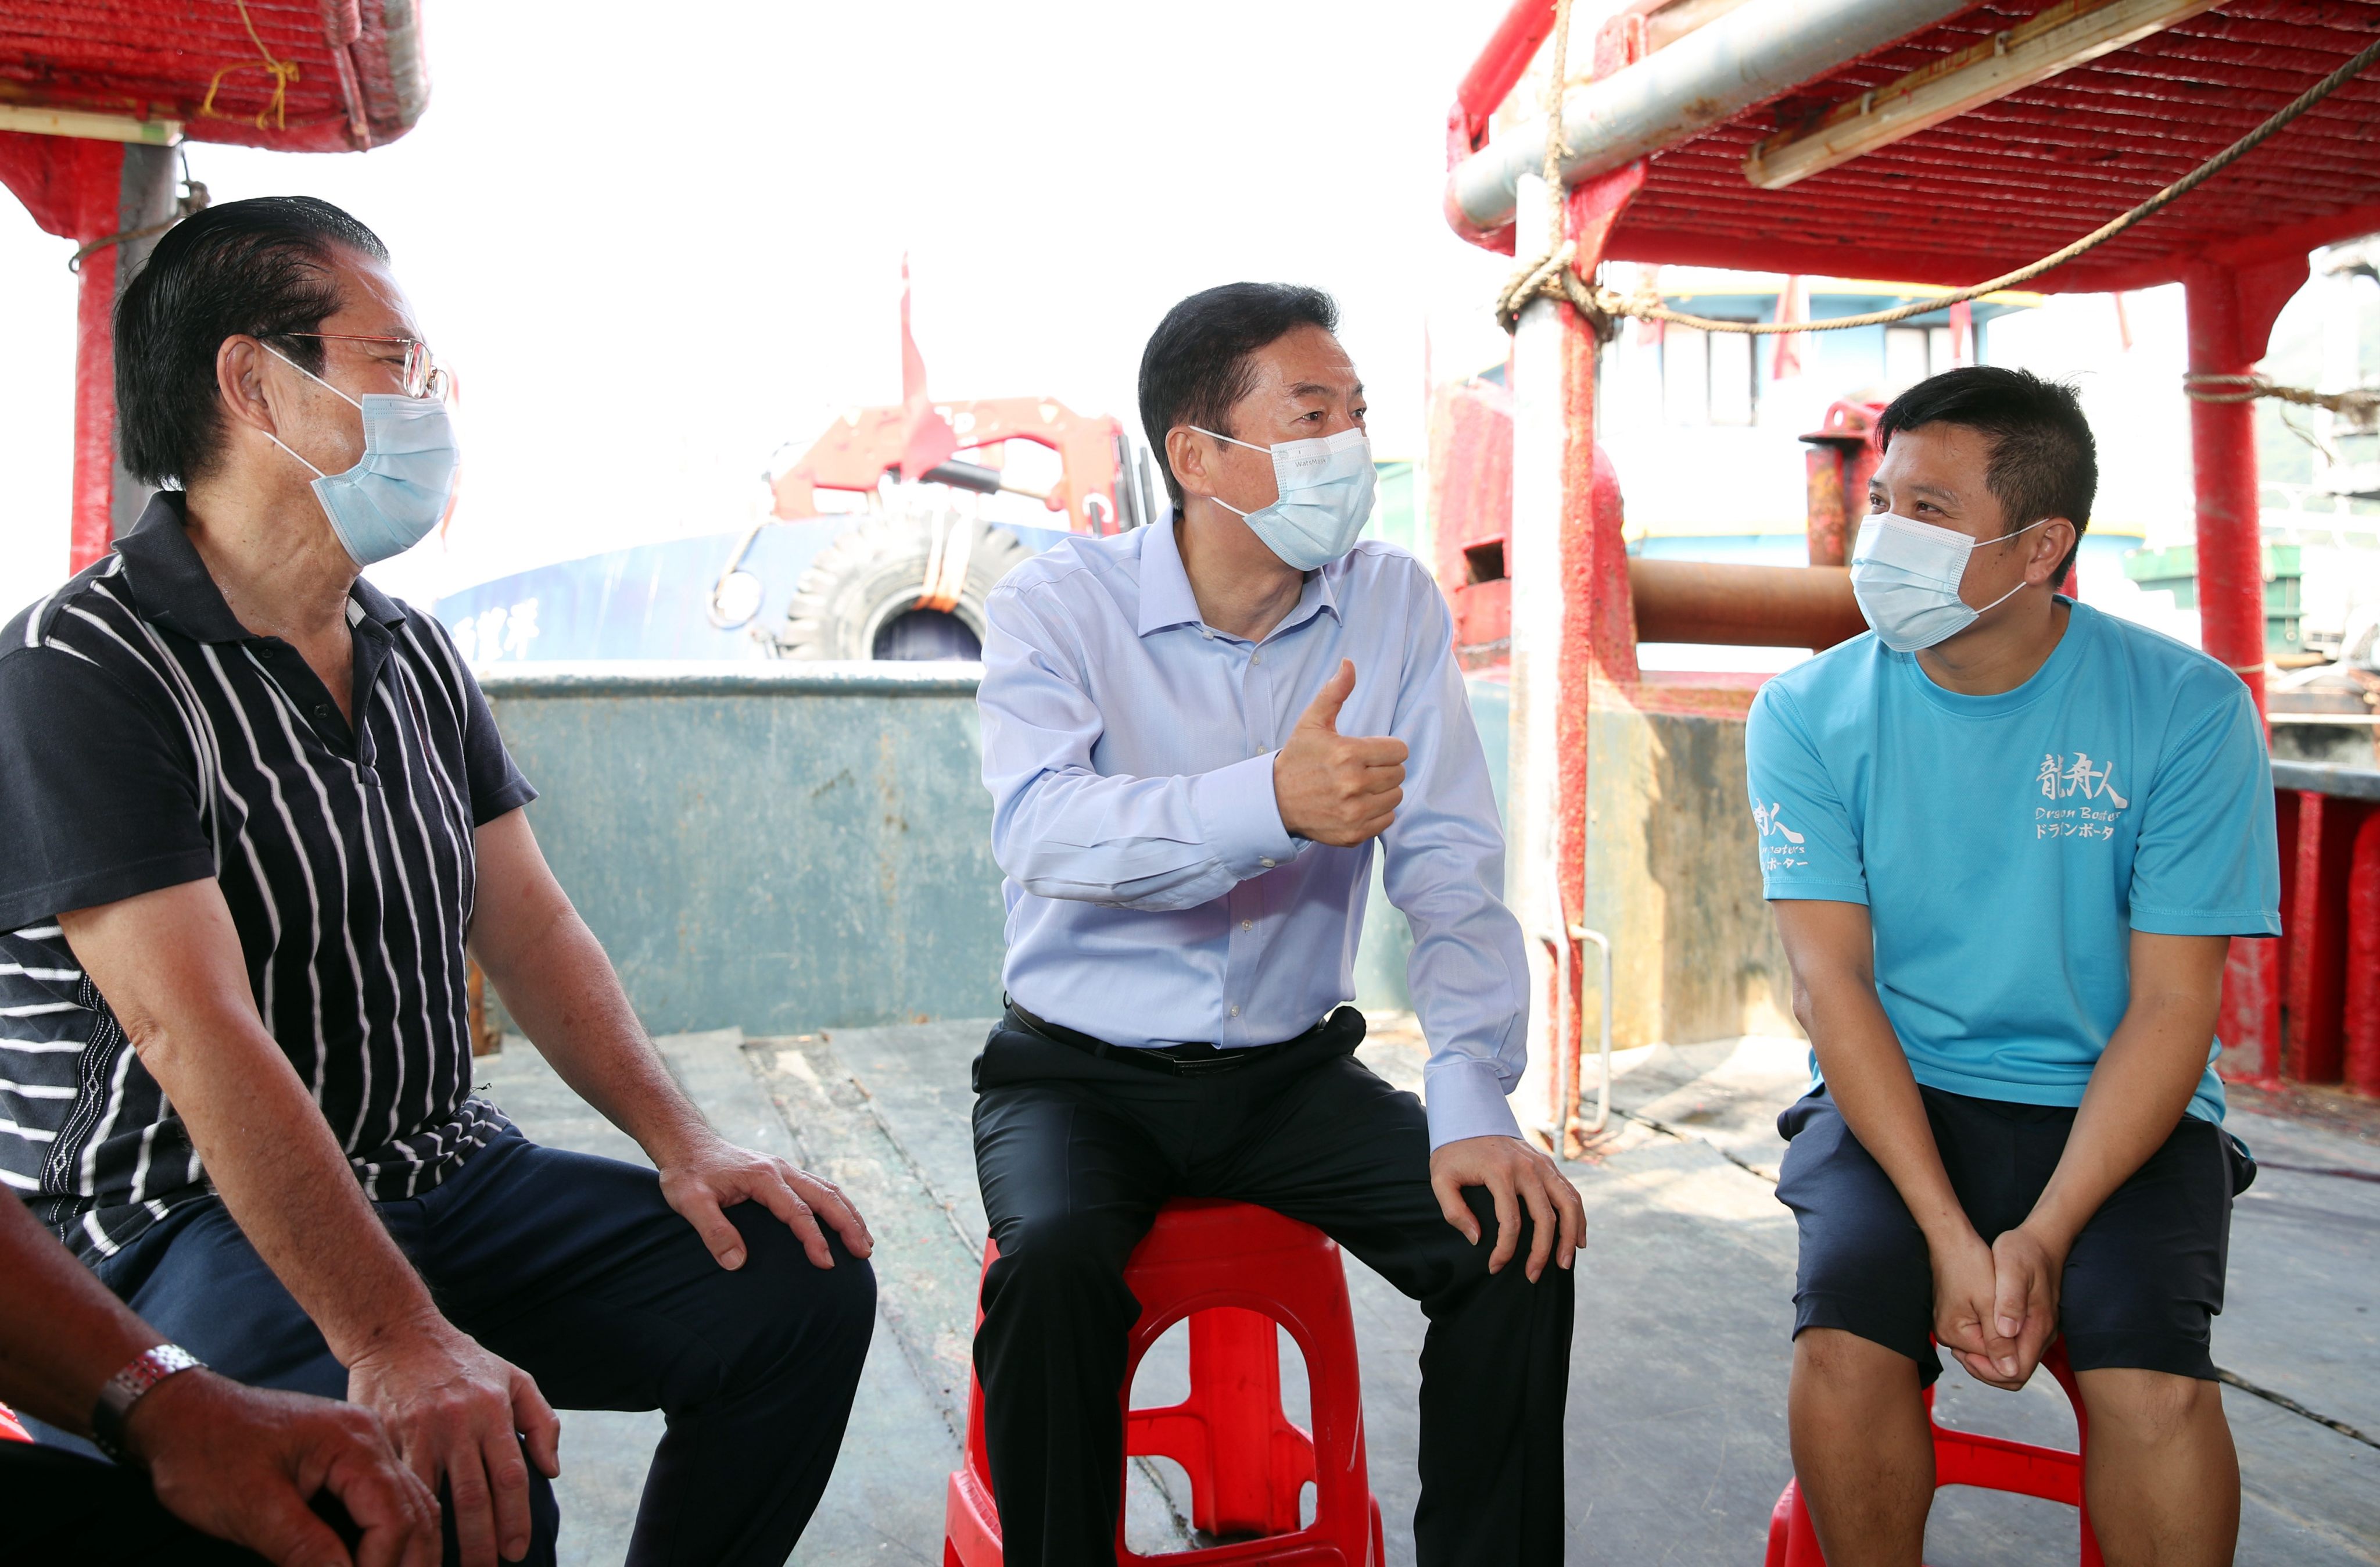 Luo Huining (centre), the director of Beijing’s liaison office, visits fishermen in Aberdeen on September 30, 2021, as part of a listening tour. Photo: Handout